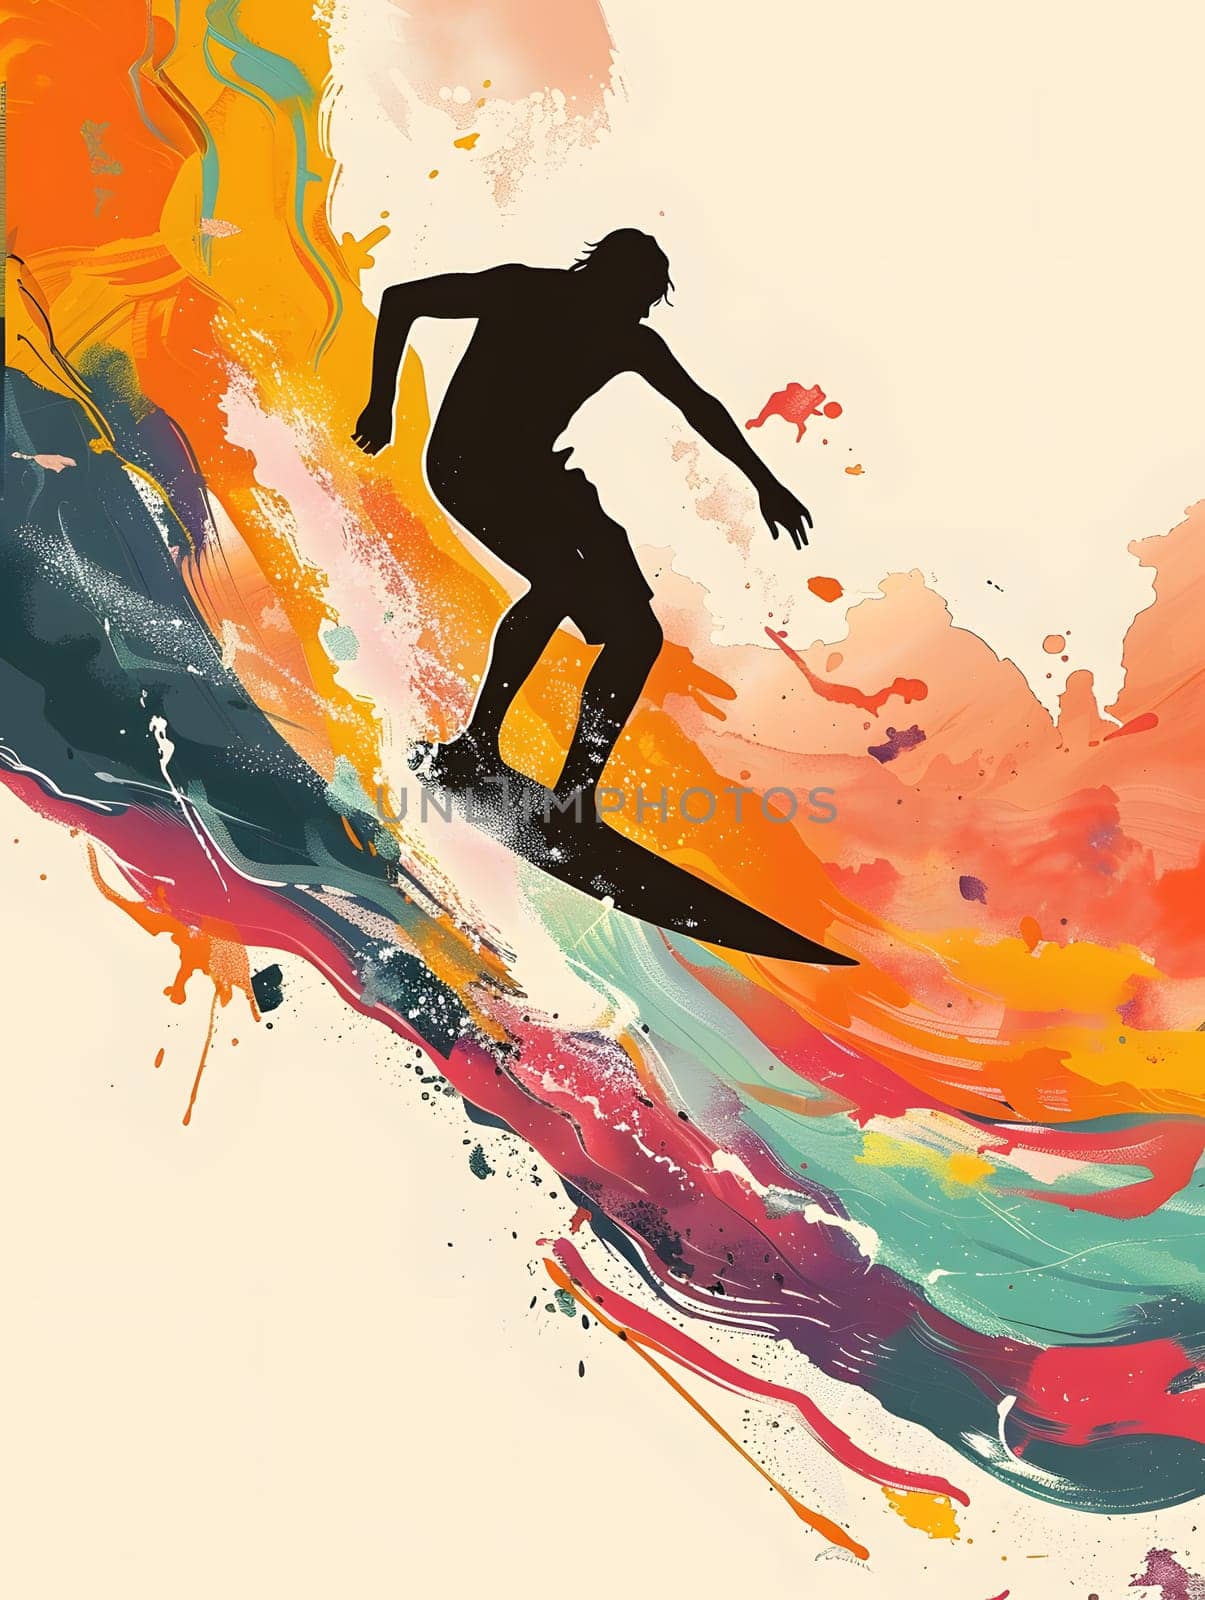 A painted silhouette of a person riding a wave on a surfboard, capturing the essence of boardsport and recreation in liquid form. People in nature art